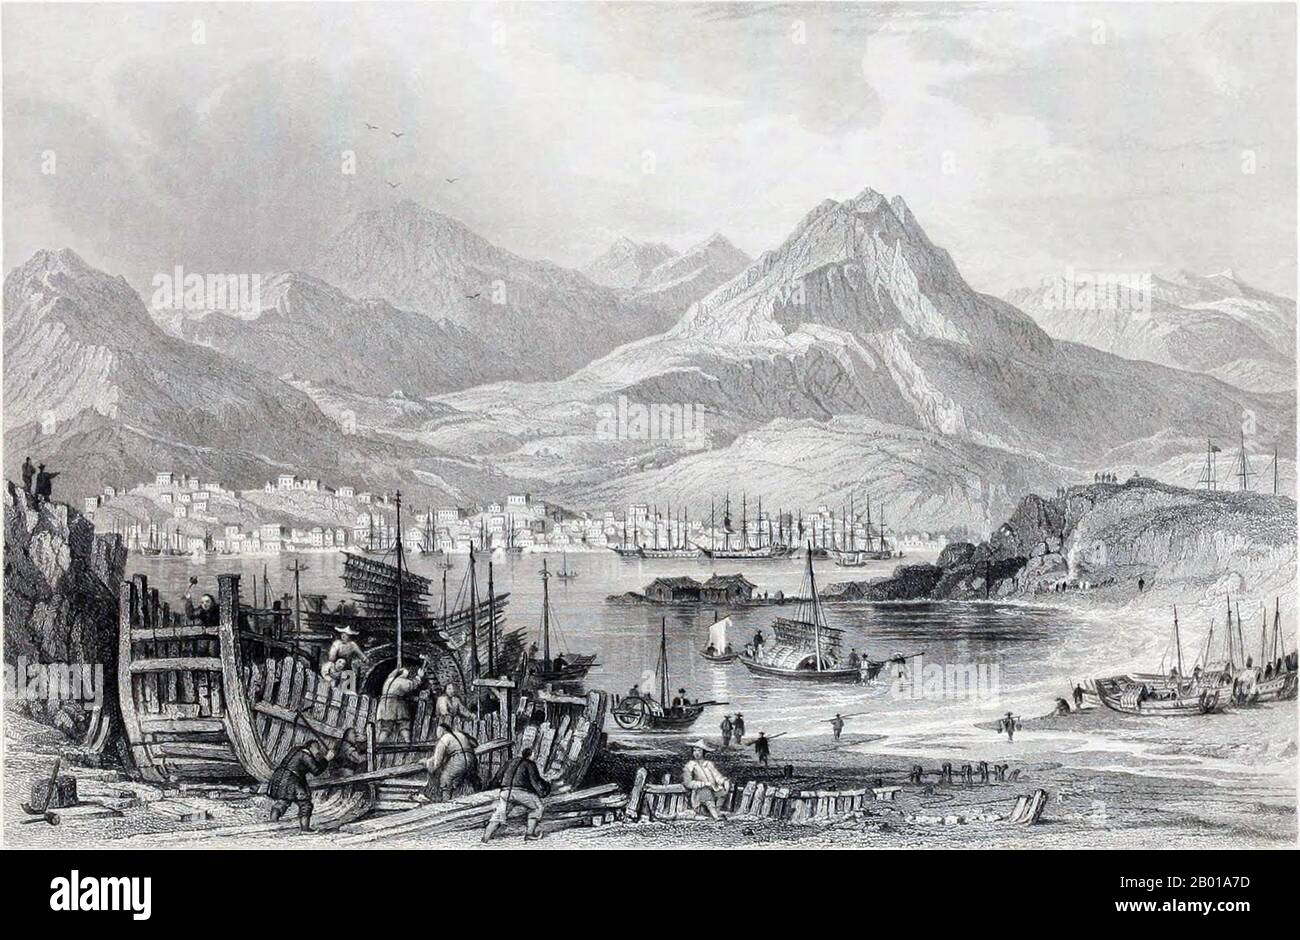 China: Hong Kong seen from Kowloon. Engraving by Samuel Fisher (1802-1855) from a drawing by Thomas Allom (13 March 1804 - 21 October 1872), 1843.  In 1839, the refusal by Qing Dynasty authorities to import opium resulted in the First Opium War between China and Britain. Hong Kong Island was occupied by British forces on 20 January 1841 and was initially ceded under the Convention of Chuenpee as part of a ceasefire agreement between Captain Charles Elliot and Governor Qishan, but the agreement was never ratified due to a dispute between high ranking officials in both governments. Stock Photo